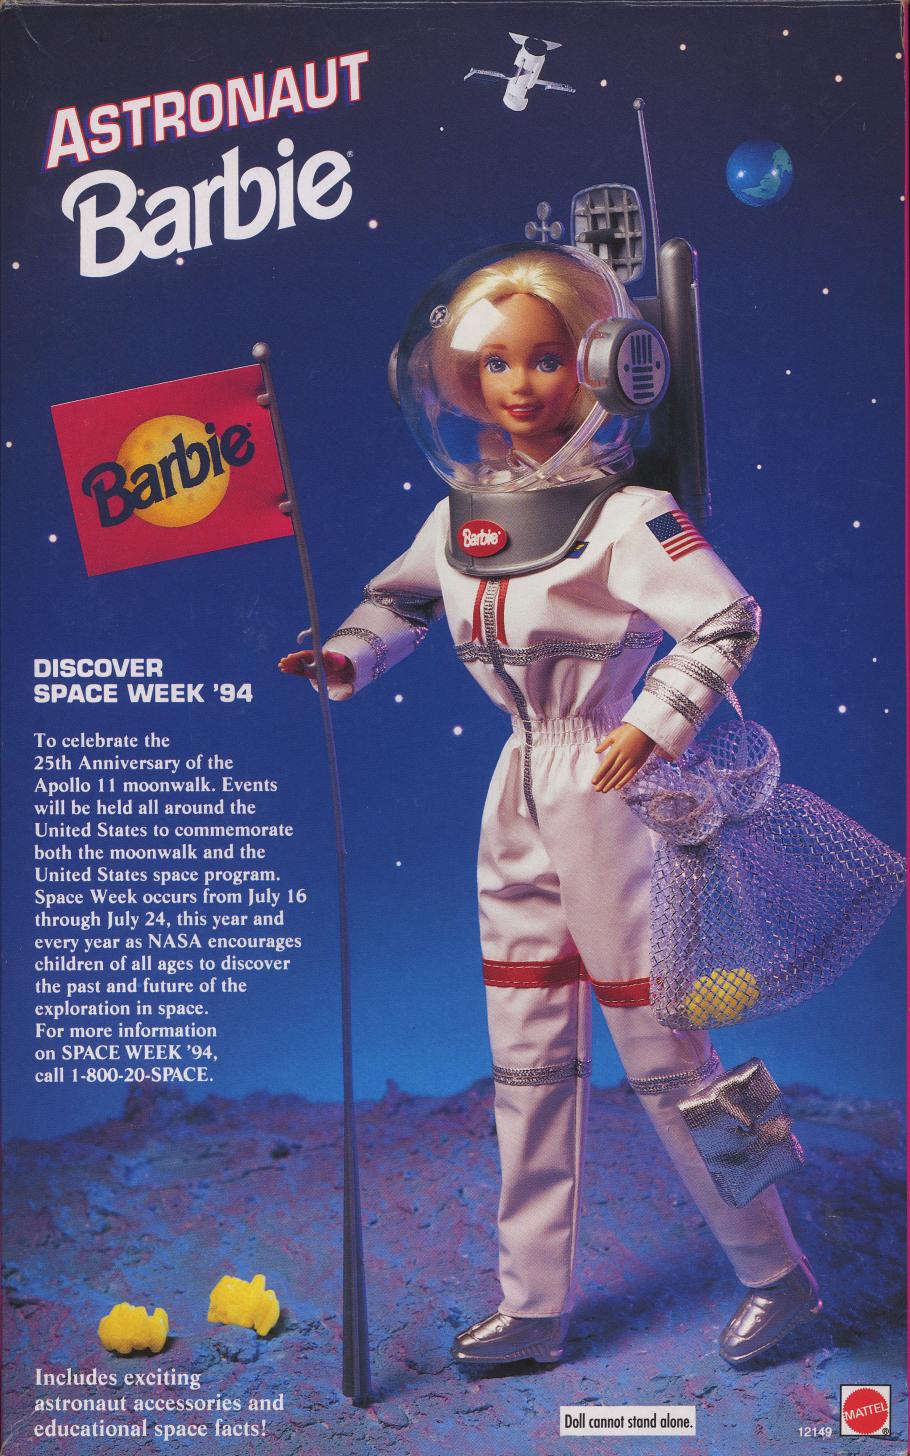 Barbie: An Astronaut for the Ages | National Air and Space Museum